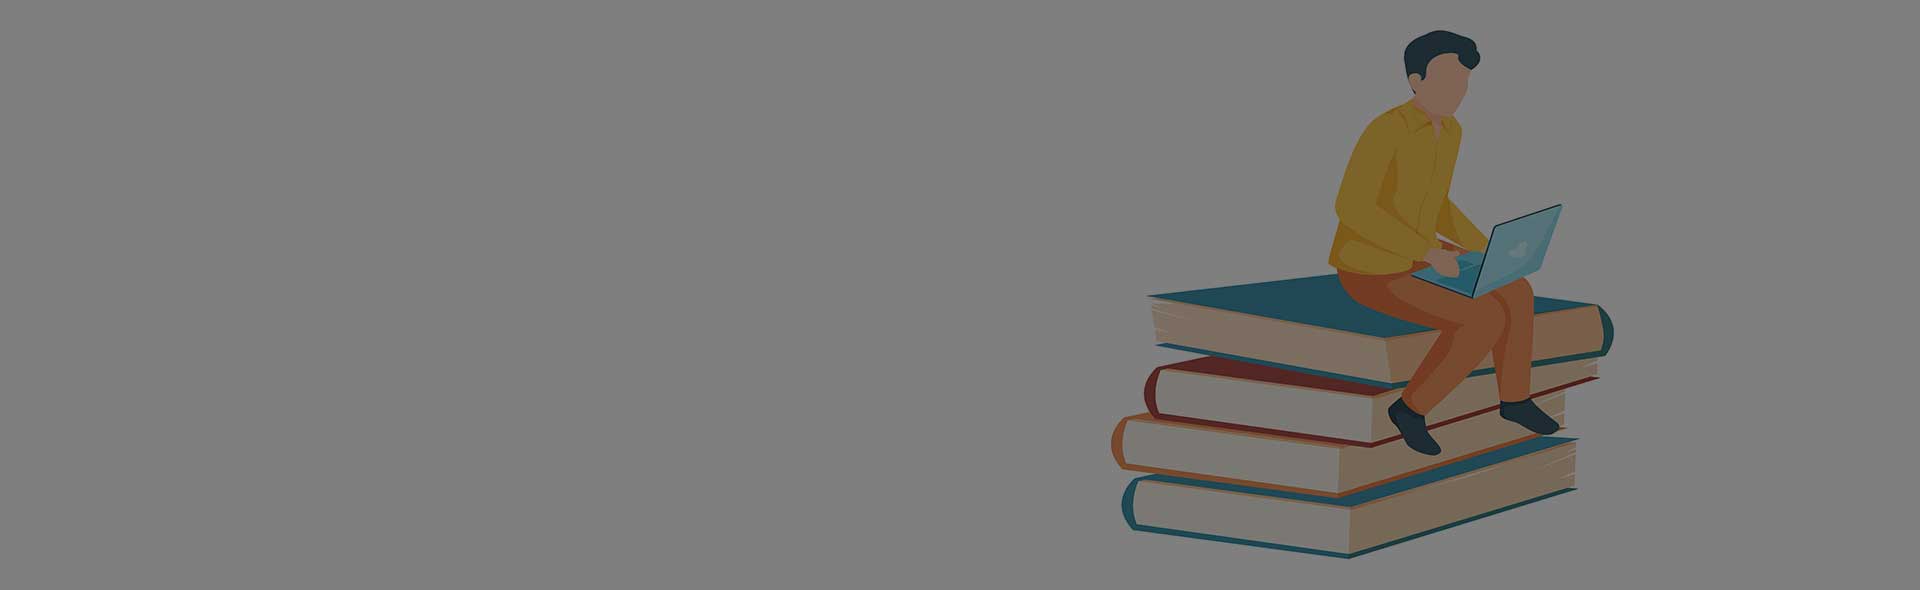 Must Read Books banner image